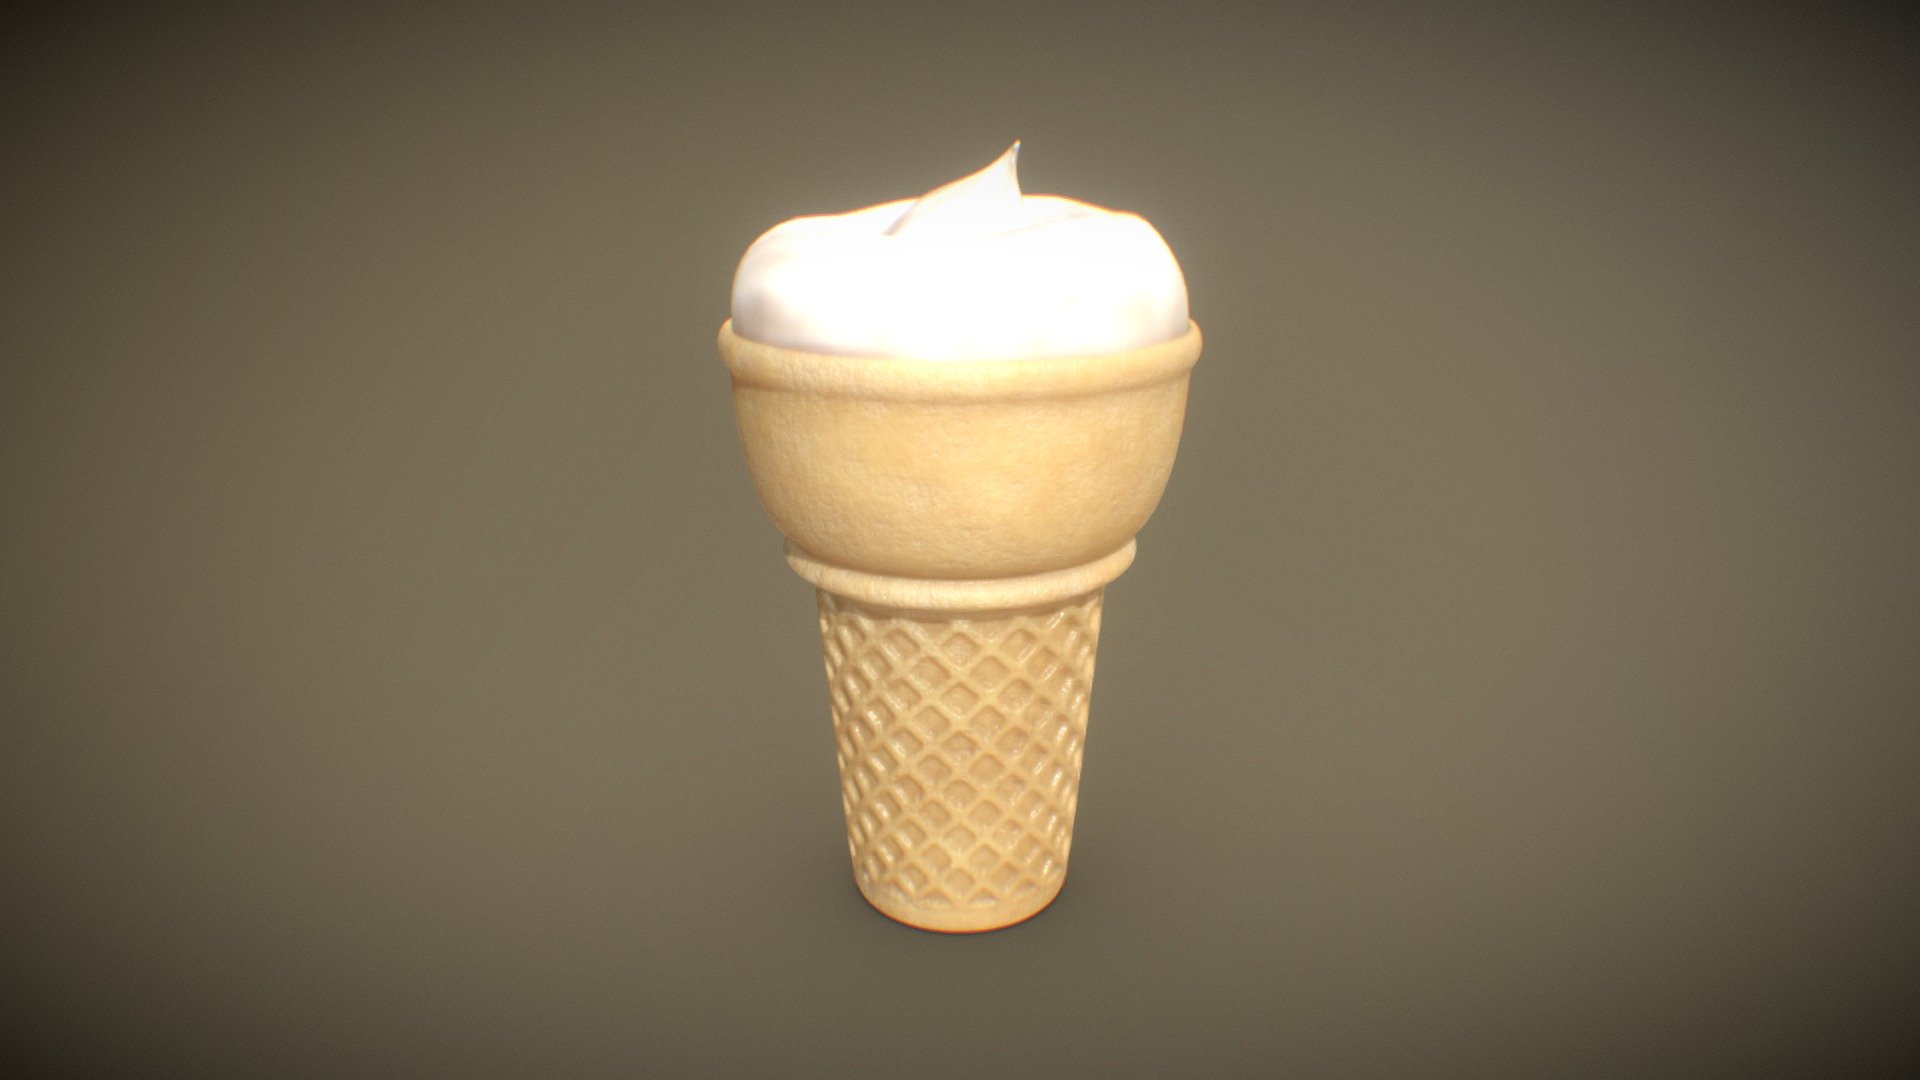 3D model of an Icecream in a wafer cone




Native format *.blend

Scene ready to render in Blender3D

Cycles and Eevee

FBX, ABC, DAE, STL and OBJ formats also available.

glTF .glb available

PBR Textures

Texture maps included

UV unwrapped

Units: metric

Dimensions: ~ 10x7x6cm

Textures: 4096x4096px

34948 vertices (subdiv level 2)

34944 faces (subdiv level 2)

2180 vertices (subdiv level 0)

2192 faces (subdiv level 0)
 - Icecream - 3D model by nacl 3d model